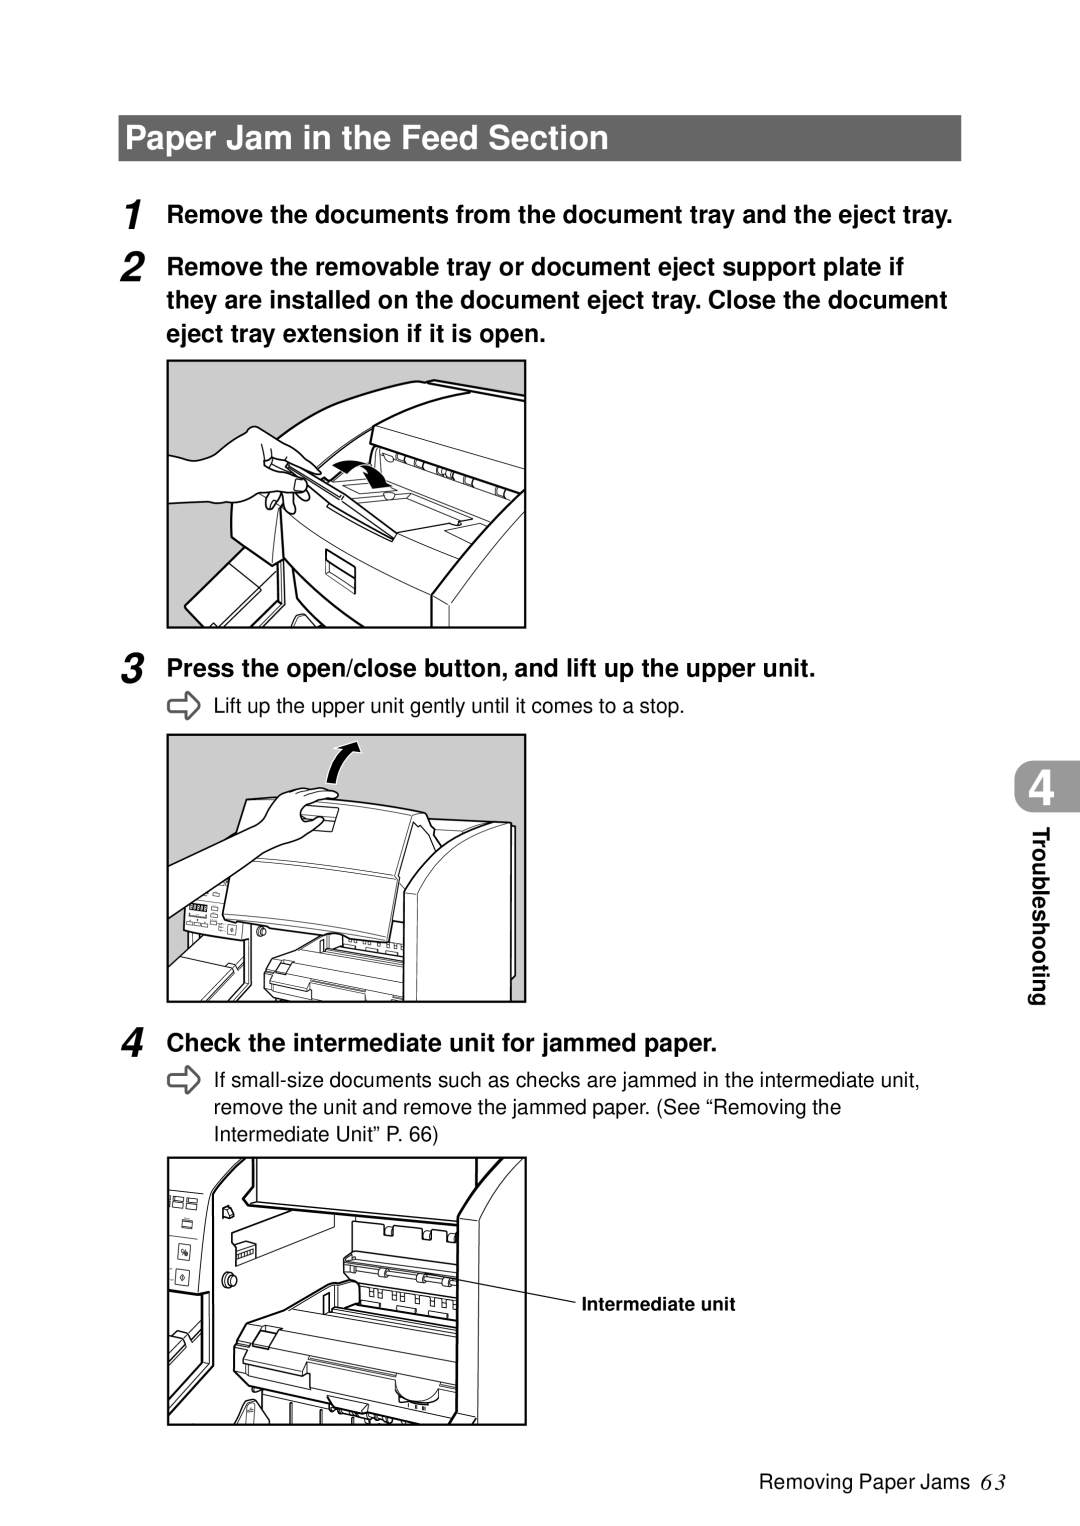 Canon DR-5060F manual Paper Jam in the Feed Section, Check the intermediate unit for jammed paper 